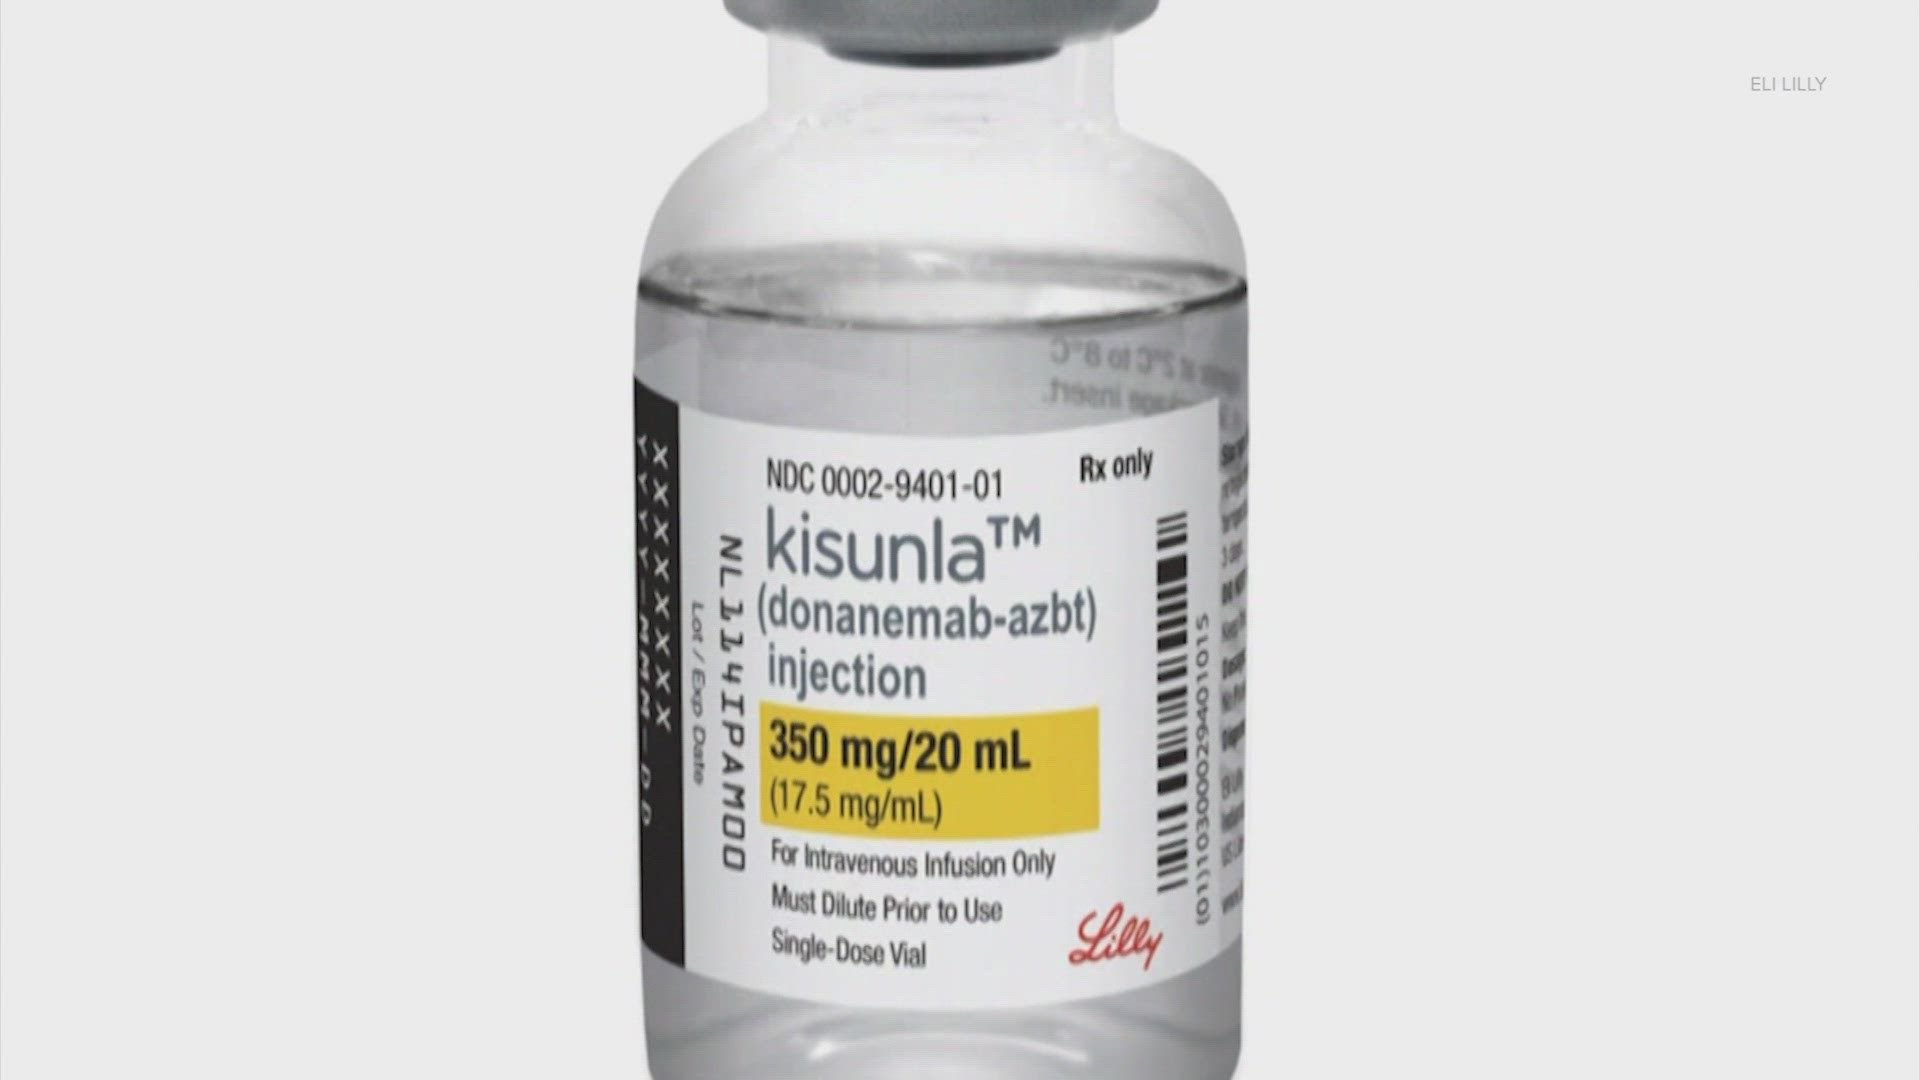 The FDA-approved drug, Kisunla, produced by Eli Lilly, can slow the brain's decline in the early stages of the disease.